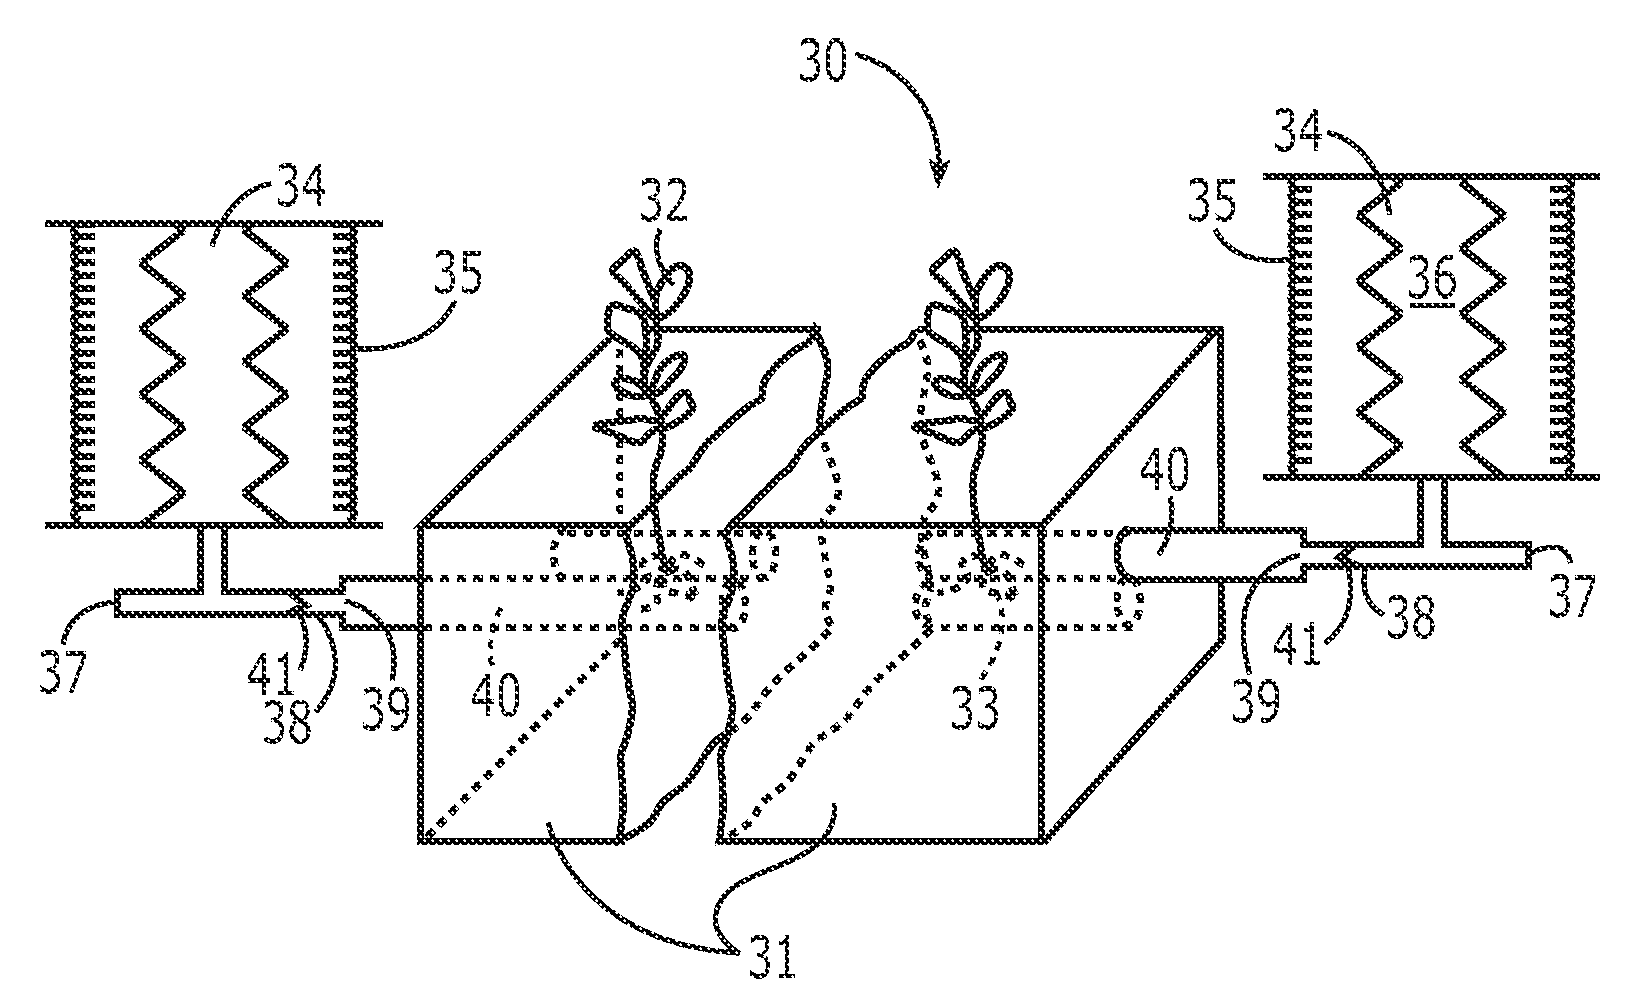 Irrigation system and associated methods